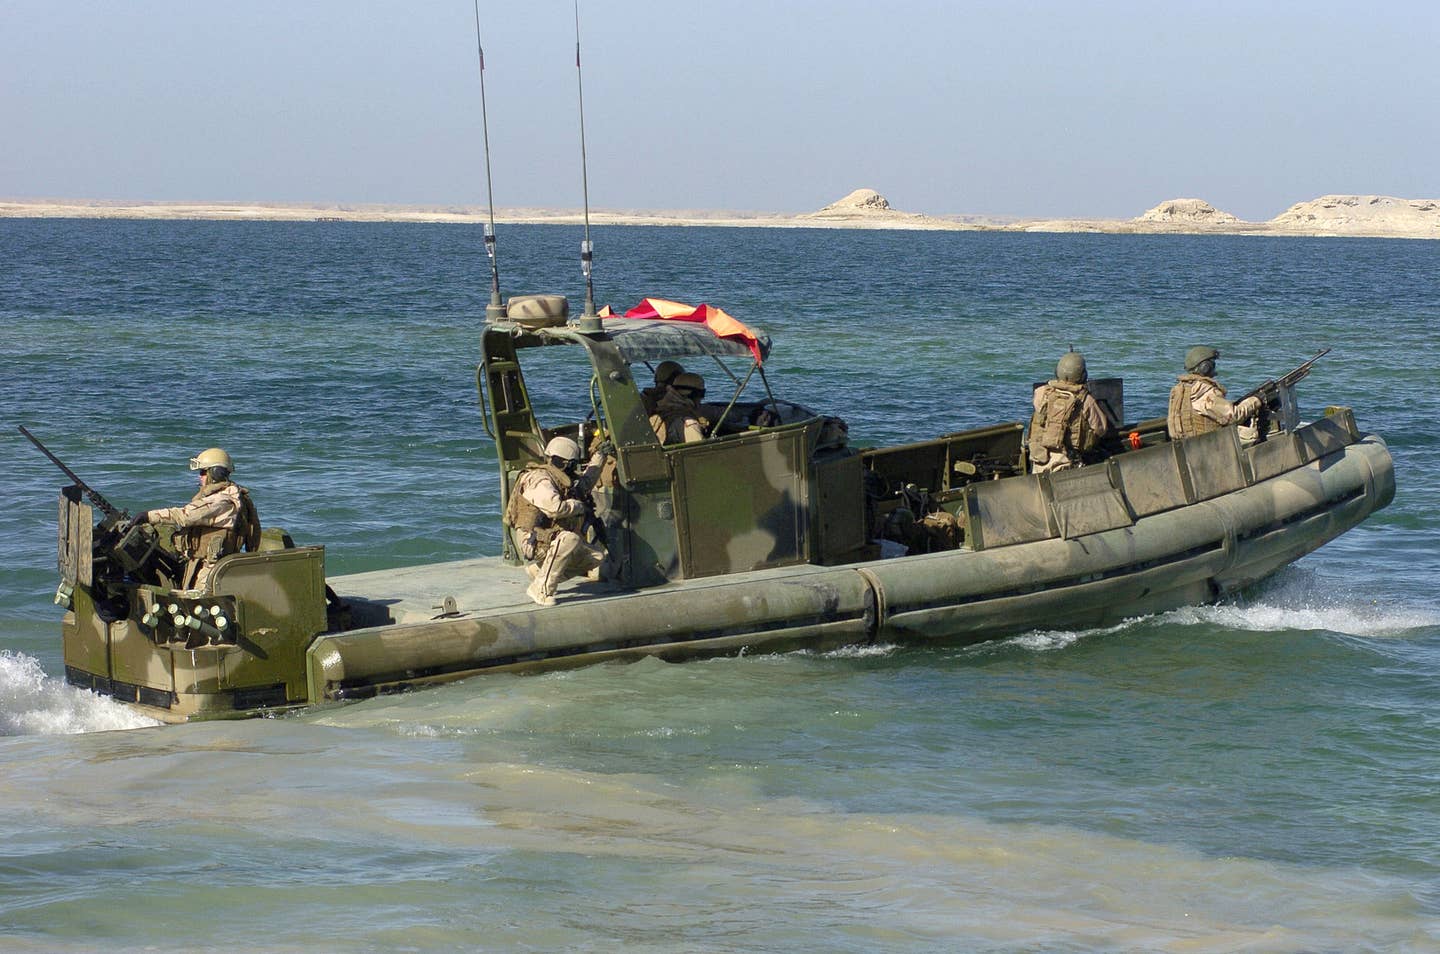 Riverines attached to Riverine Squadron 2 in a SURC at Haditha Dam Forward Operating Base conduct a patrol in Haditha, Iraq, December 20, 2007. Members of RIVRON 2 patrol Haditha’s dam and surrounding waterways, denying their use by insurgents, which in turn provides security to local fisherman. Location: Haditha Dam FOB, Anbar Province Iraq. (United States Navy, MC2 Kirk Worley)<br>